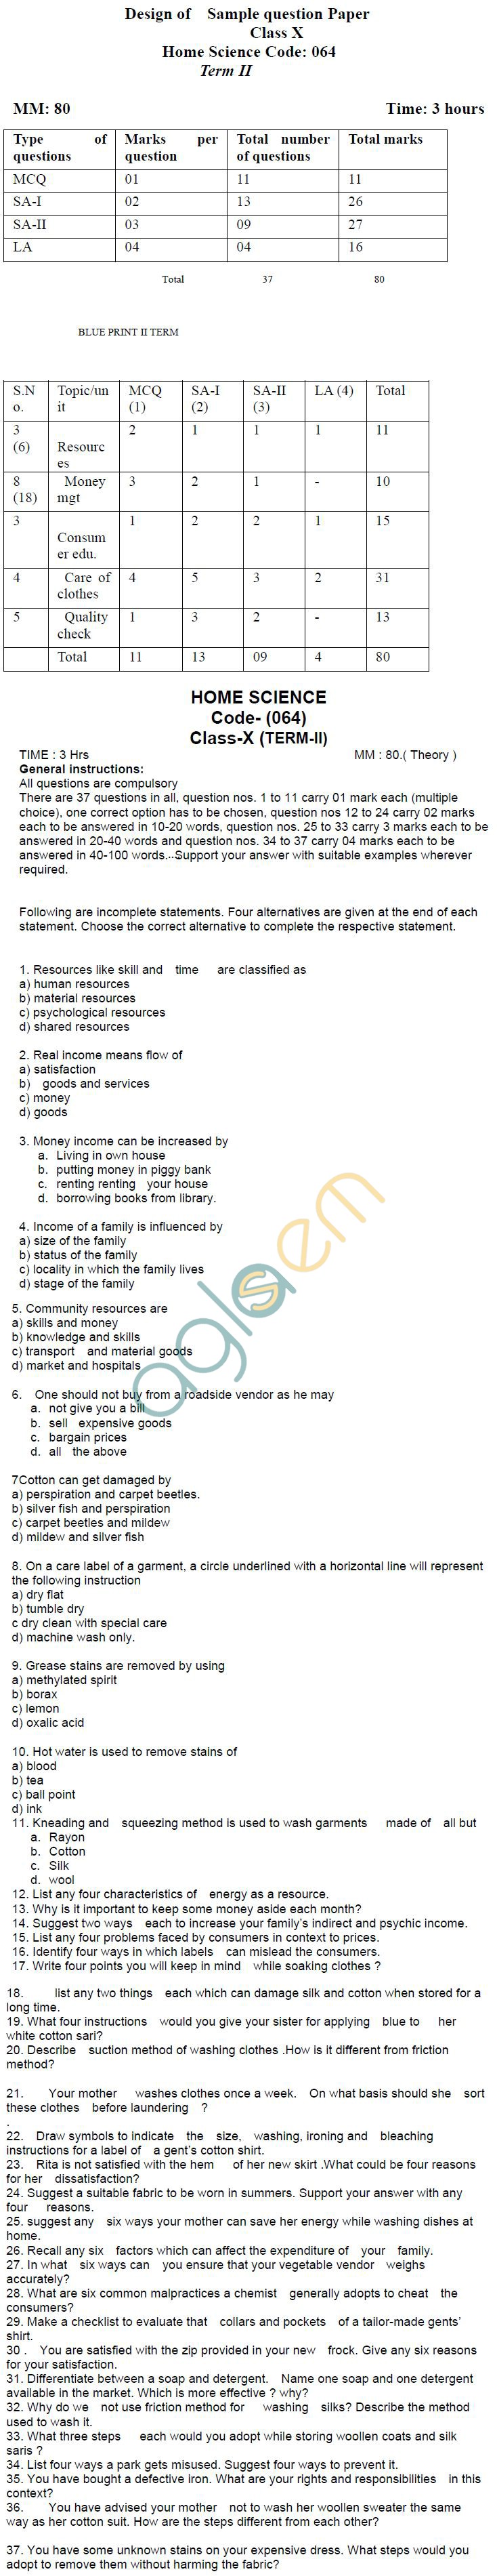 CBSE Class X Sample Papers 2013 (Second Term) Home Science